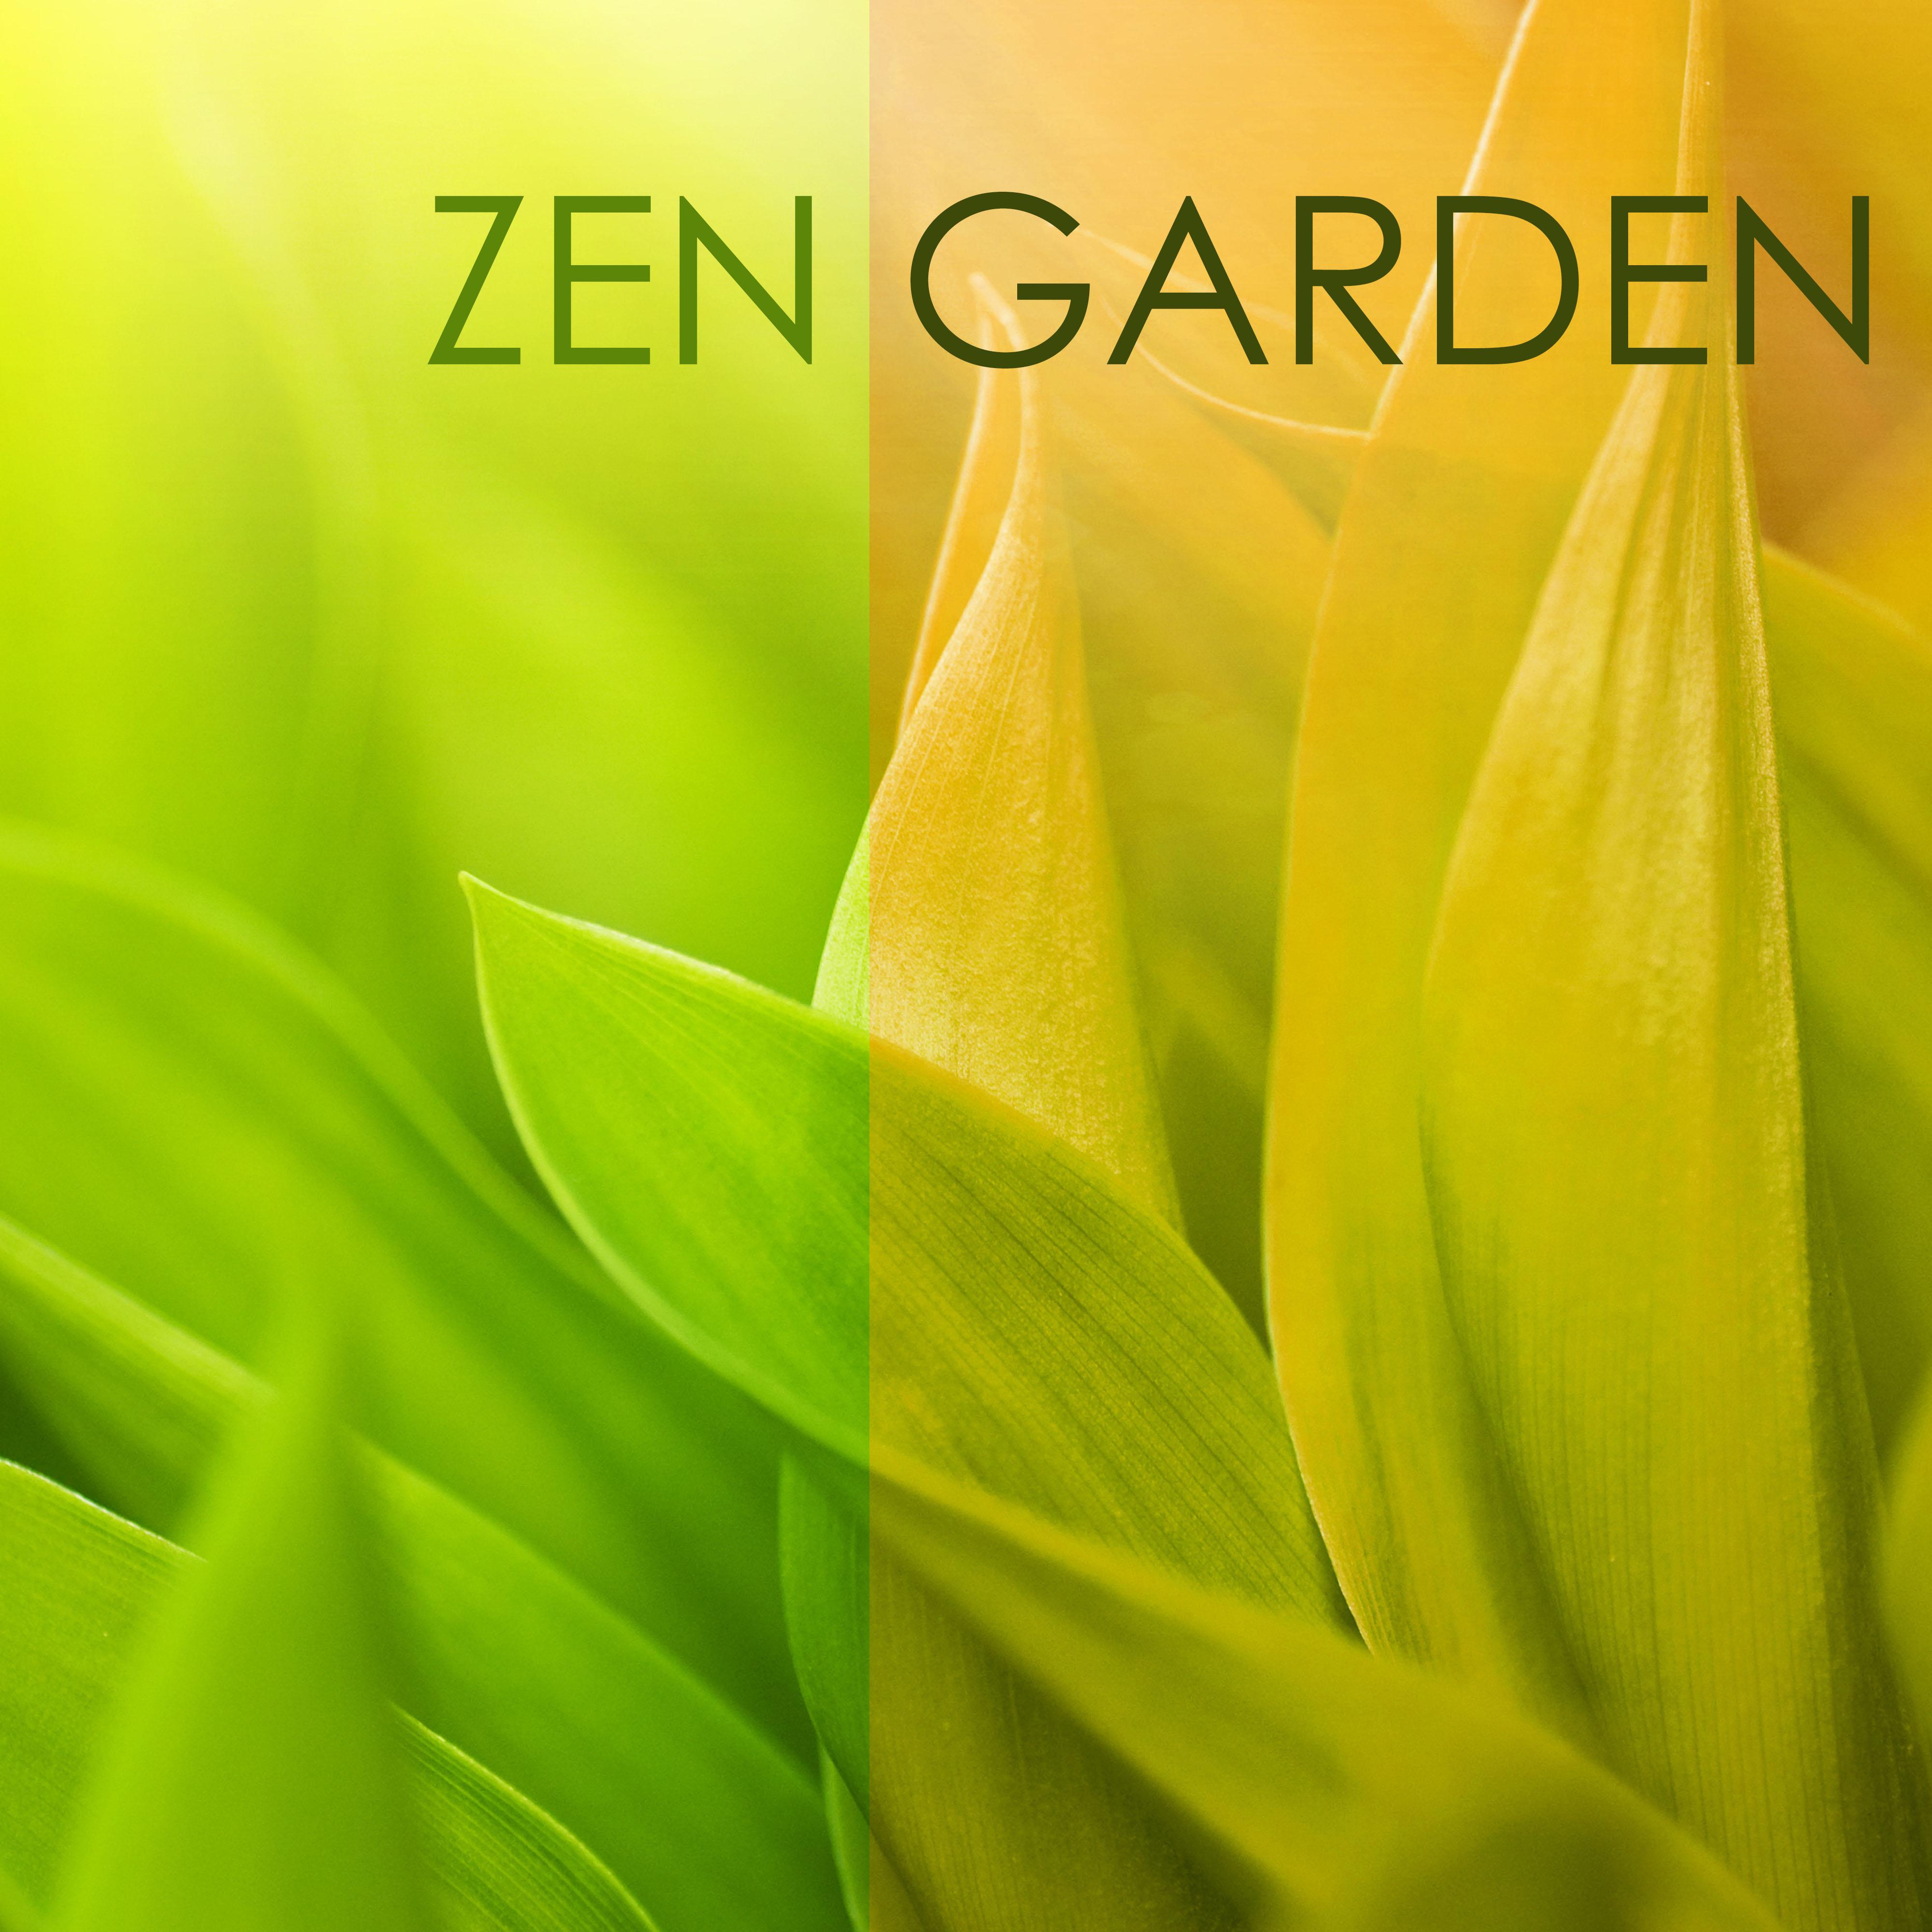 Zen Garden - Relaxing Music for Mindfulness Meditation and Relaxation